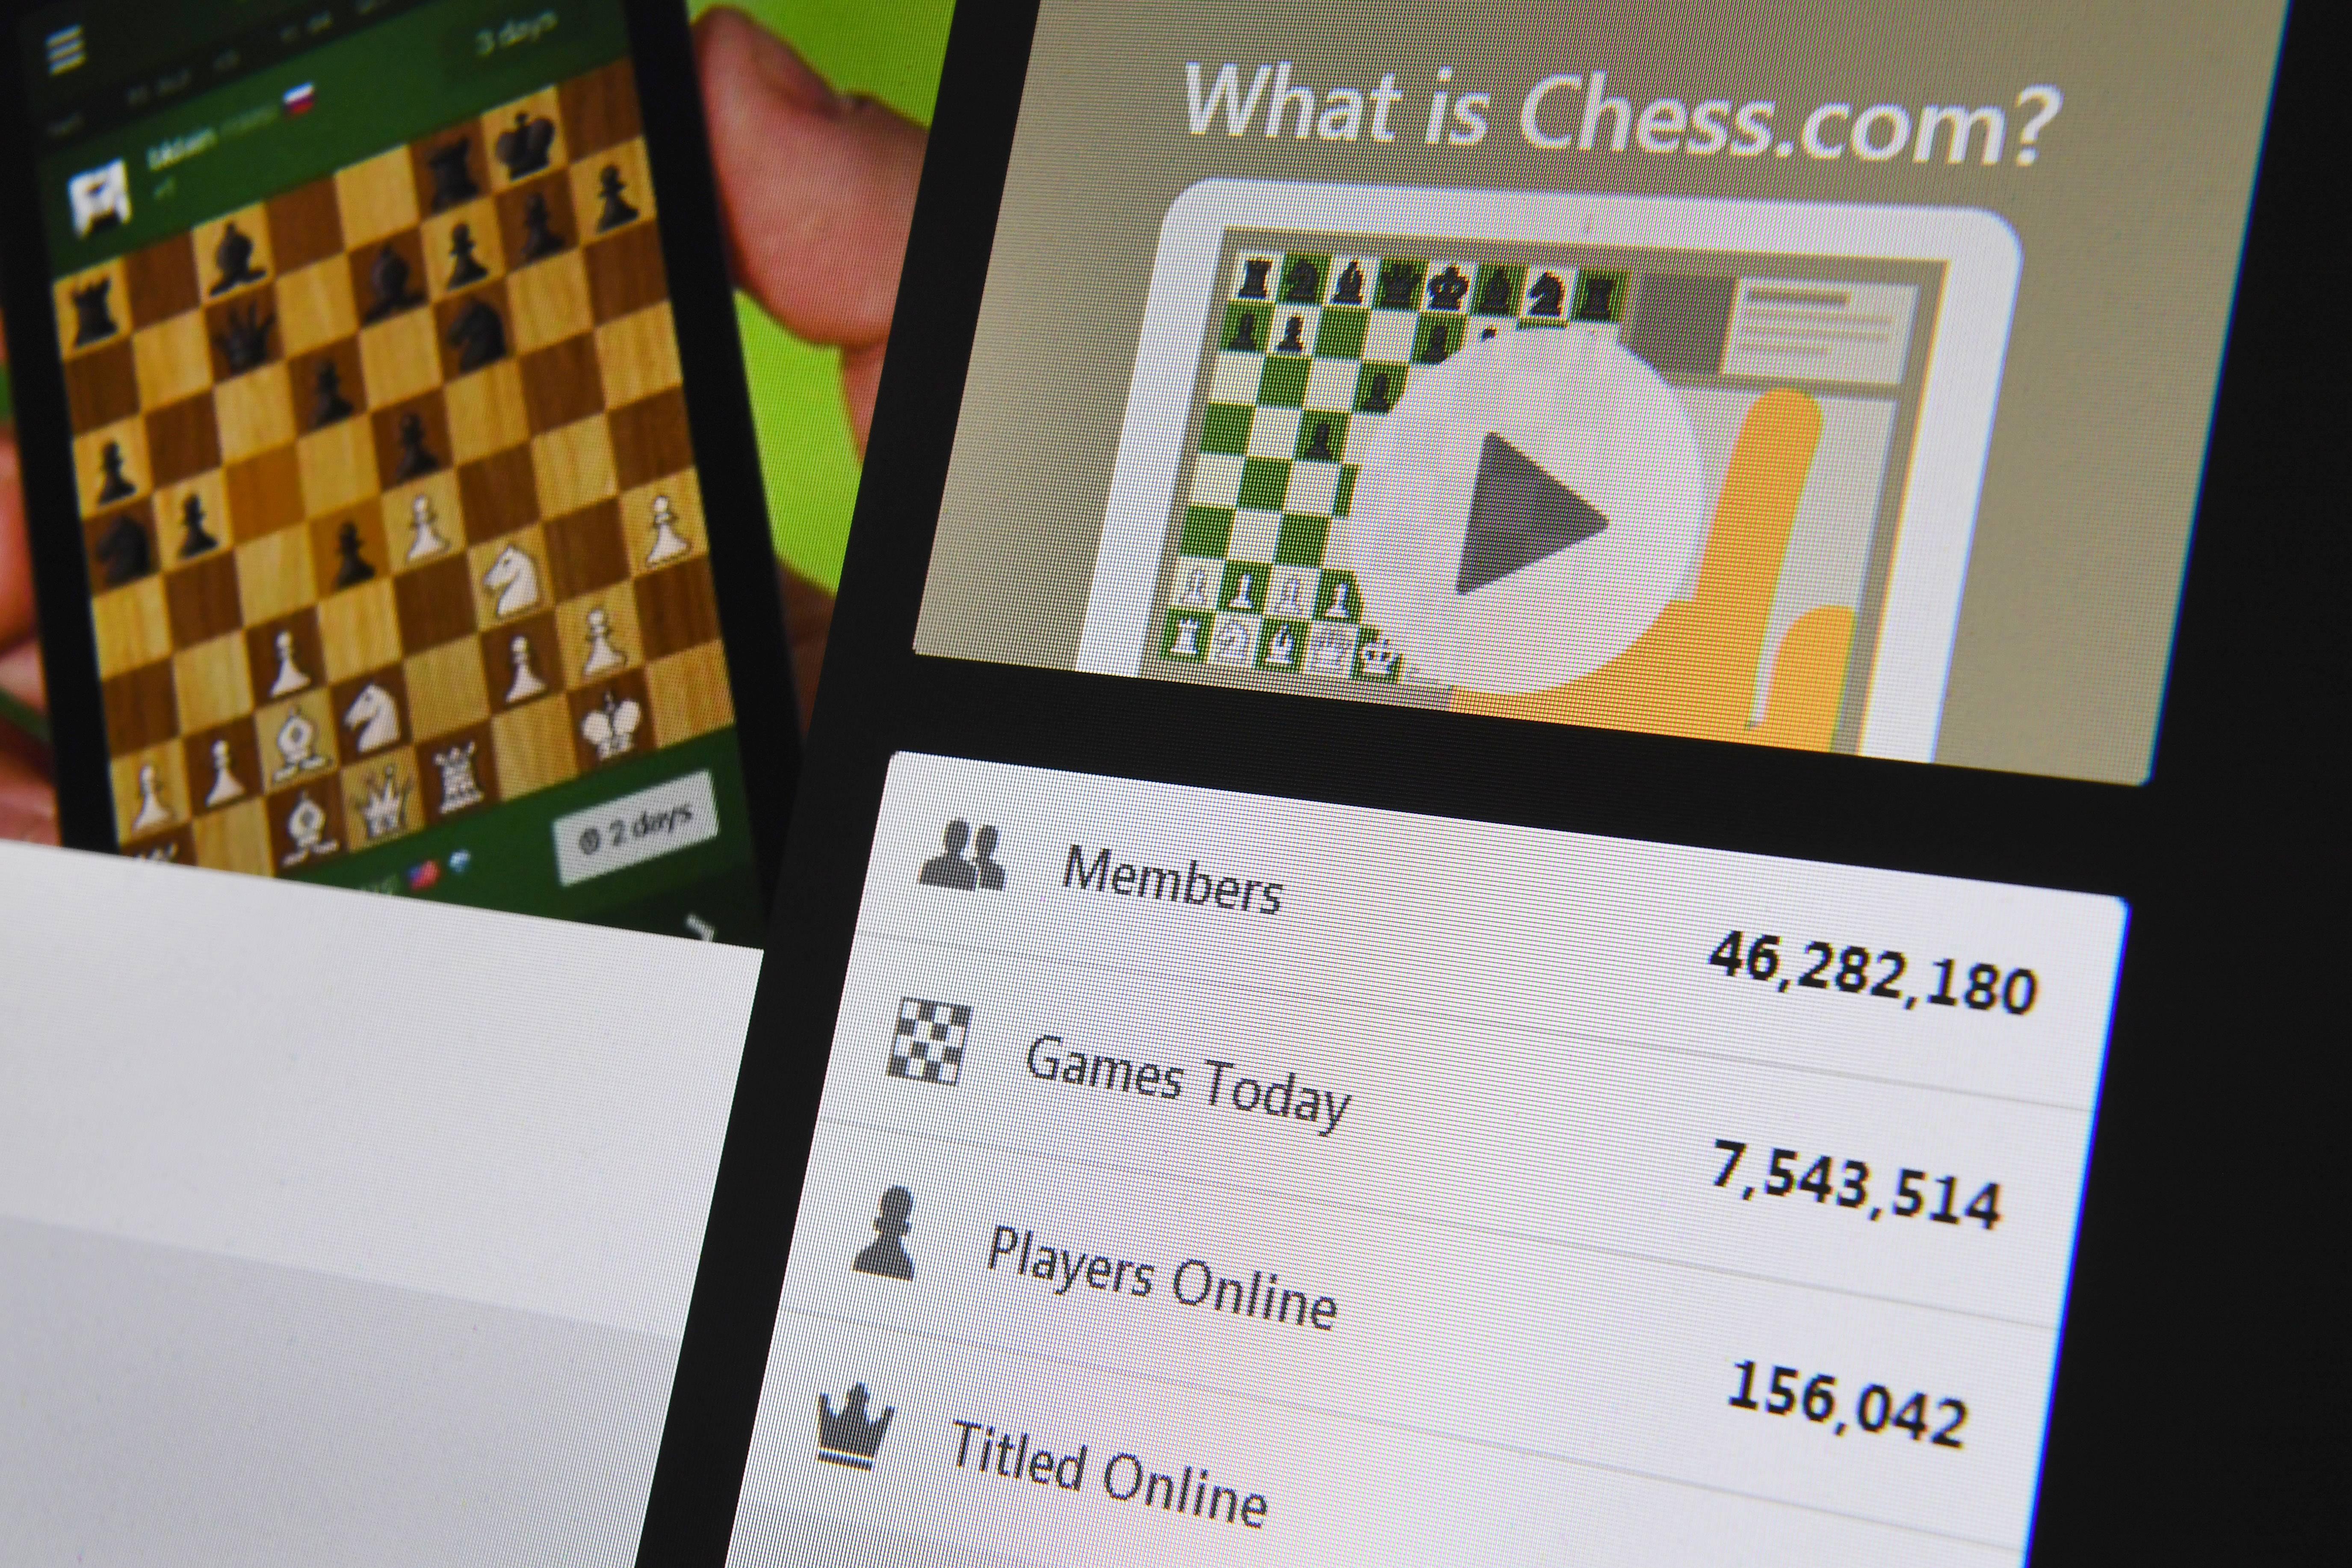 Chess.com finds streaming success - Protocol